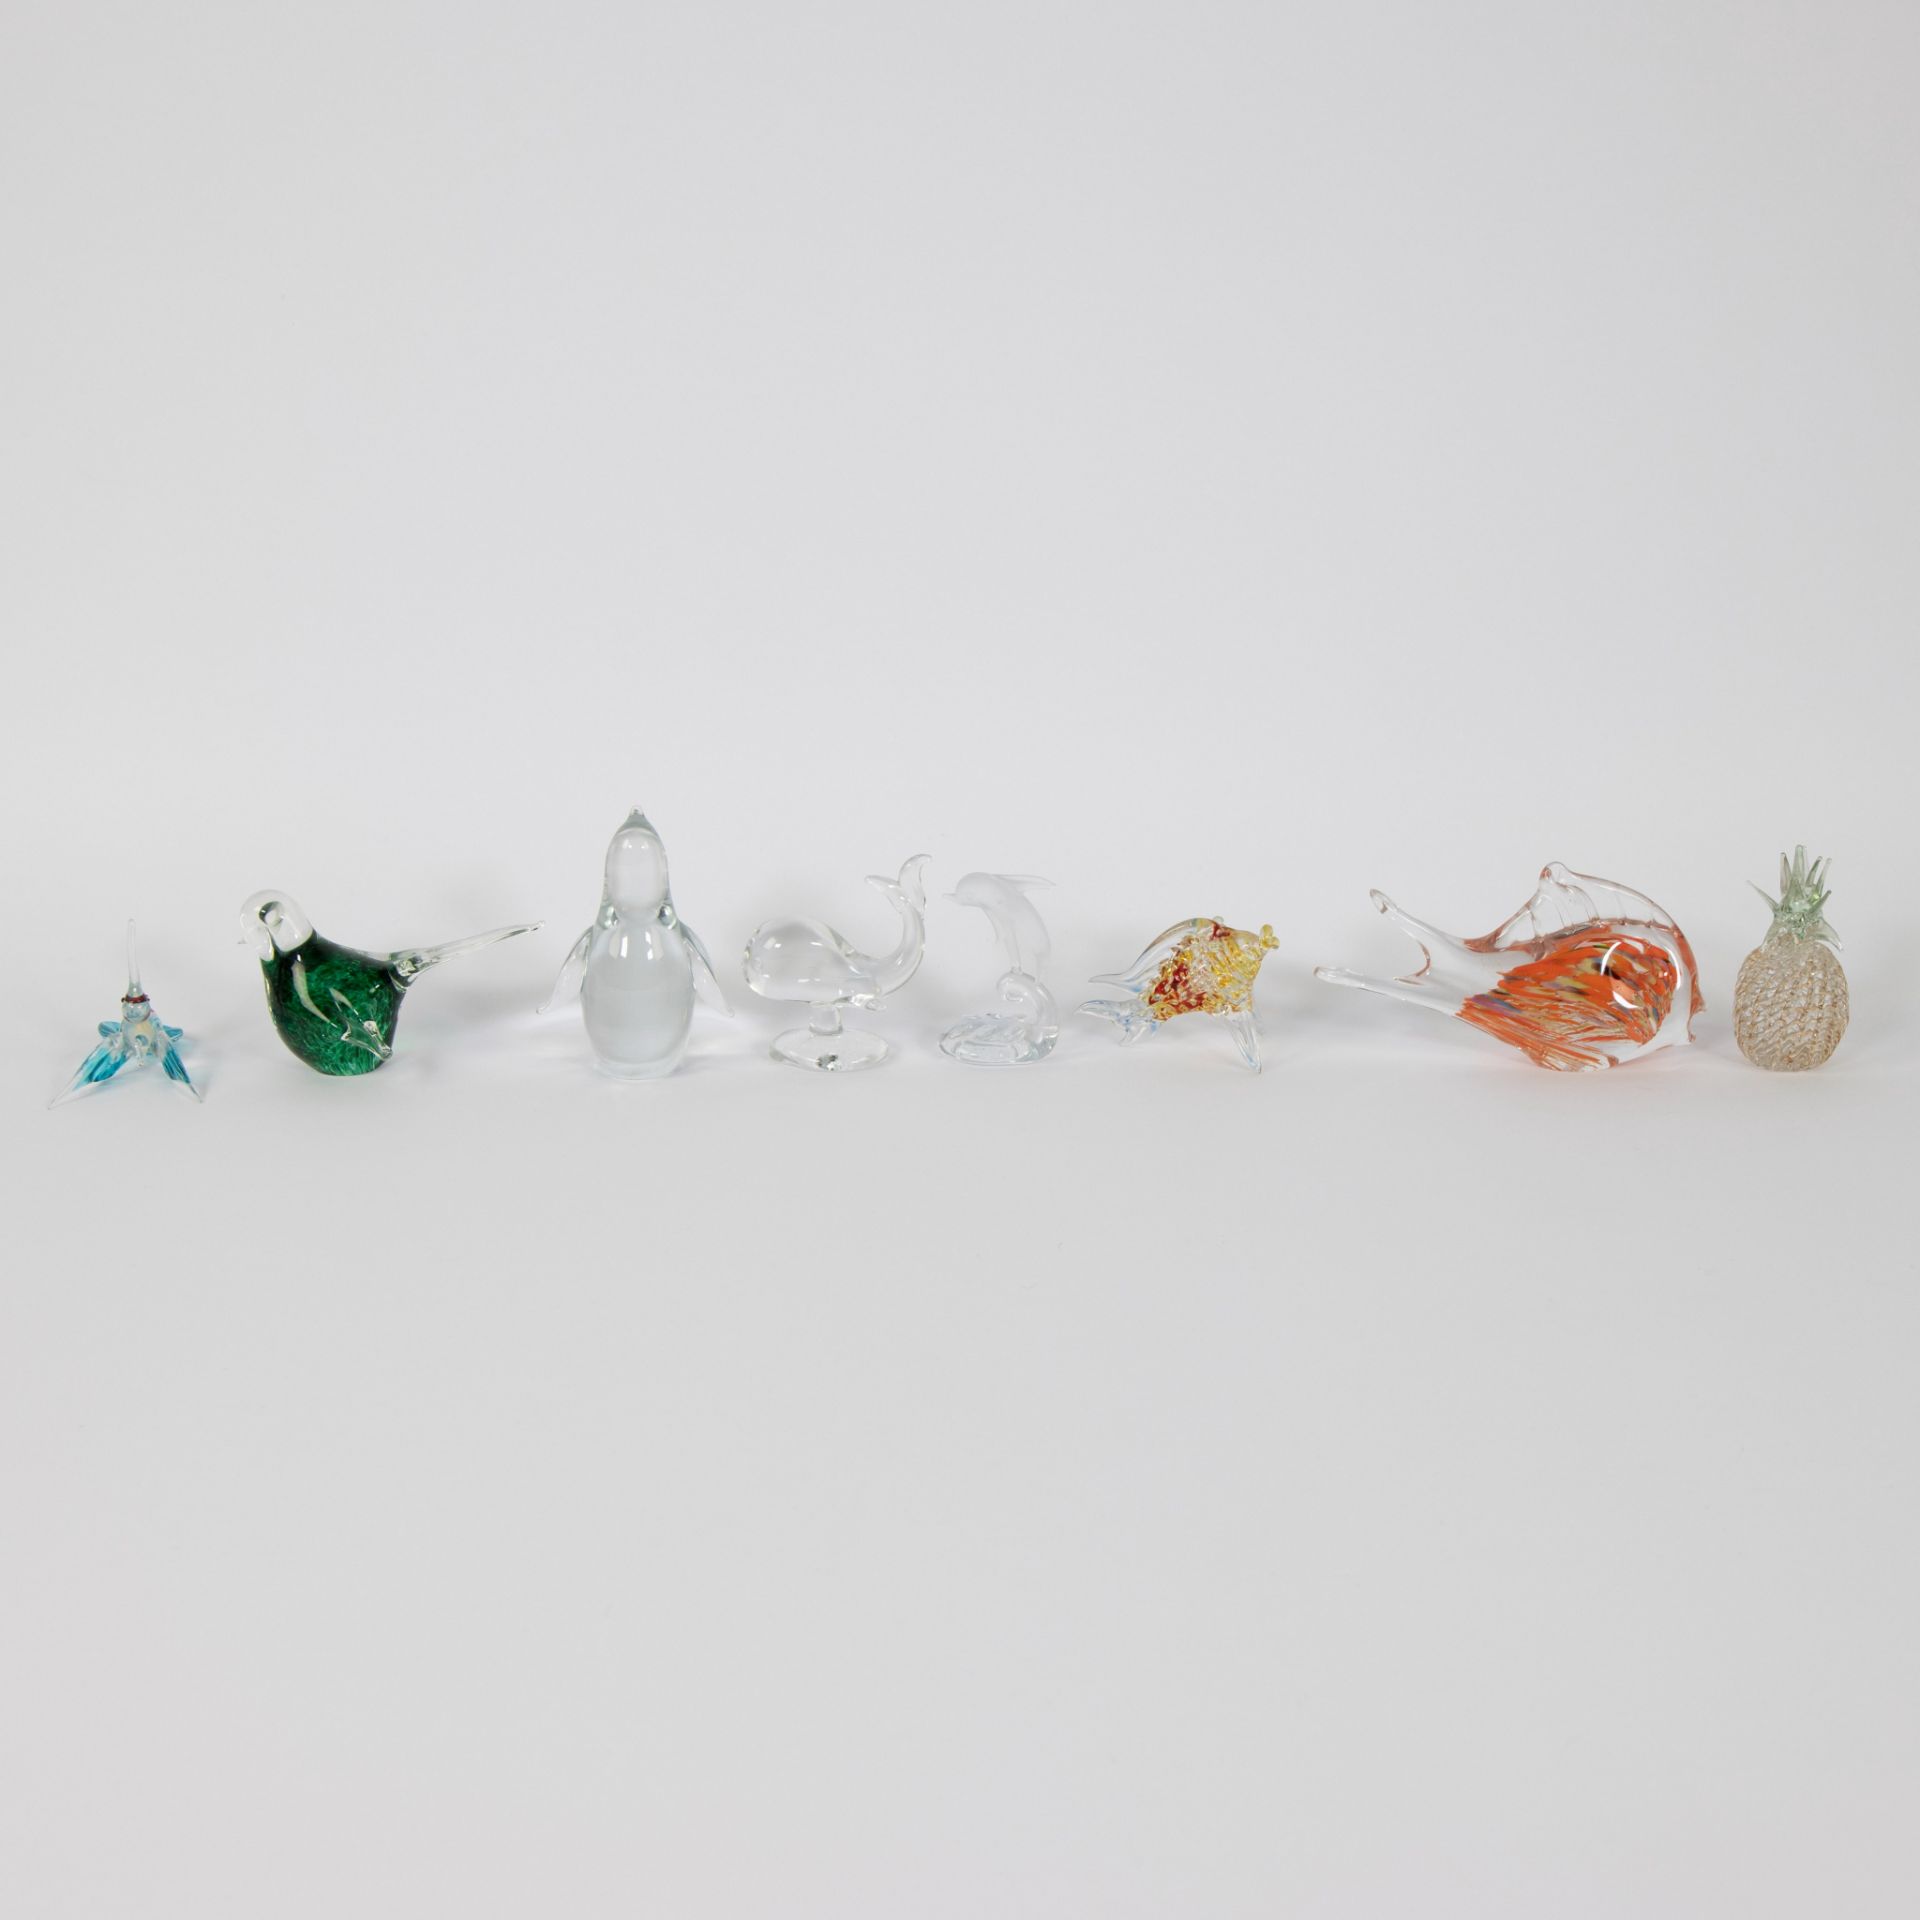 Lot of mouth-blown glass animals, MURANO - Image 5 of 5